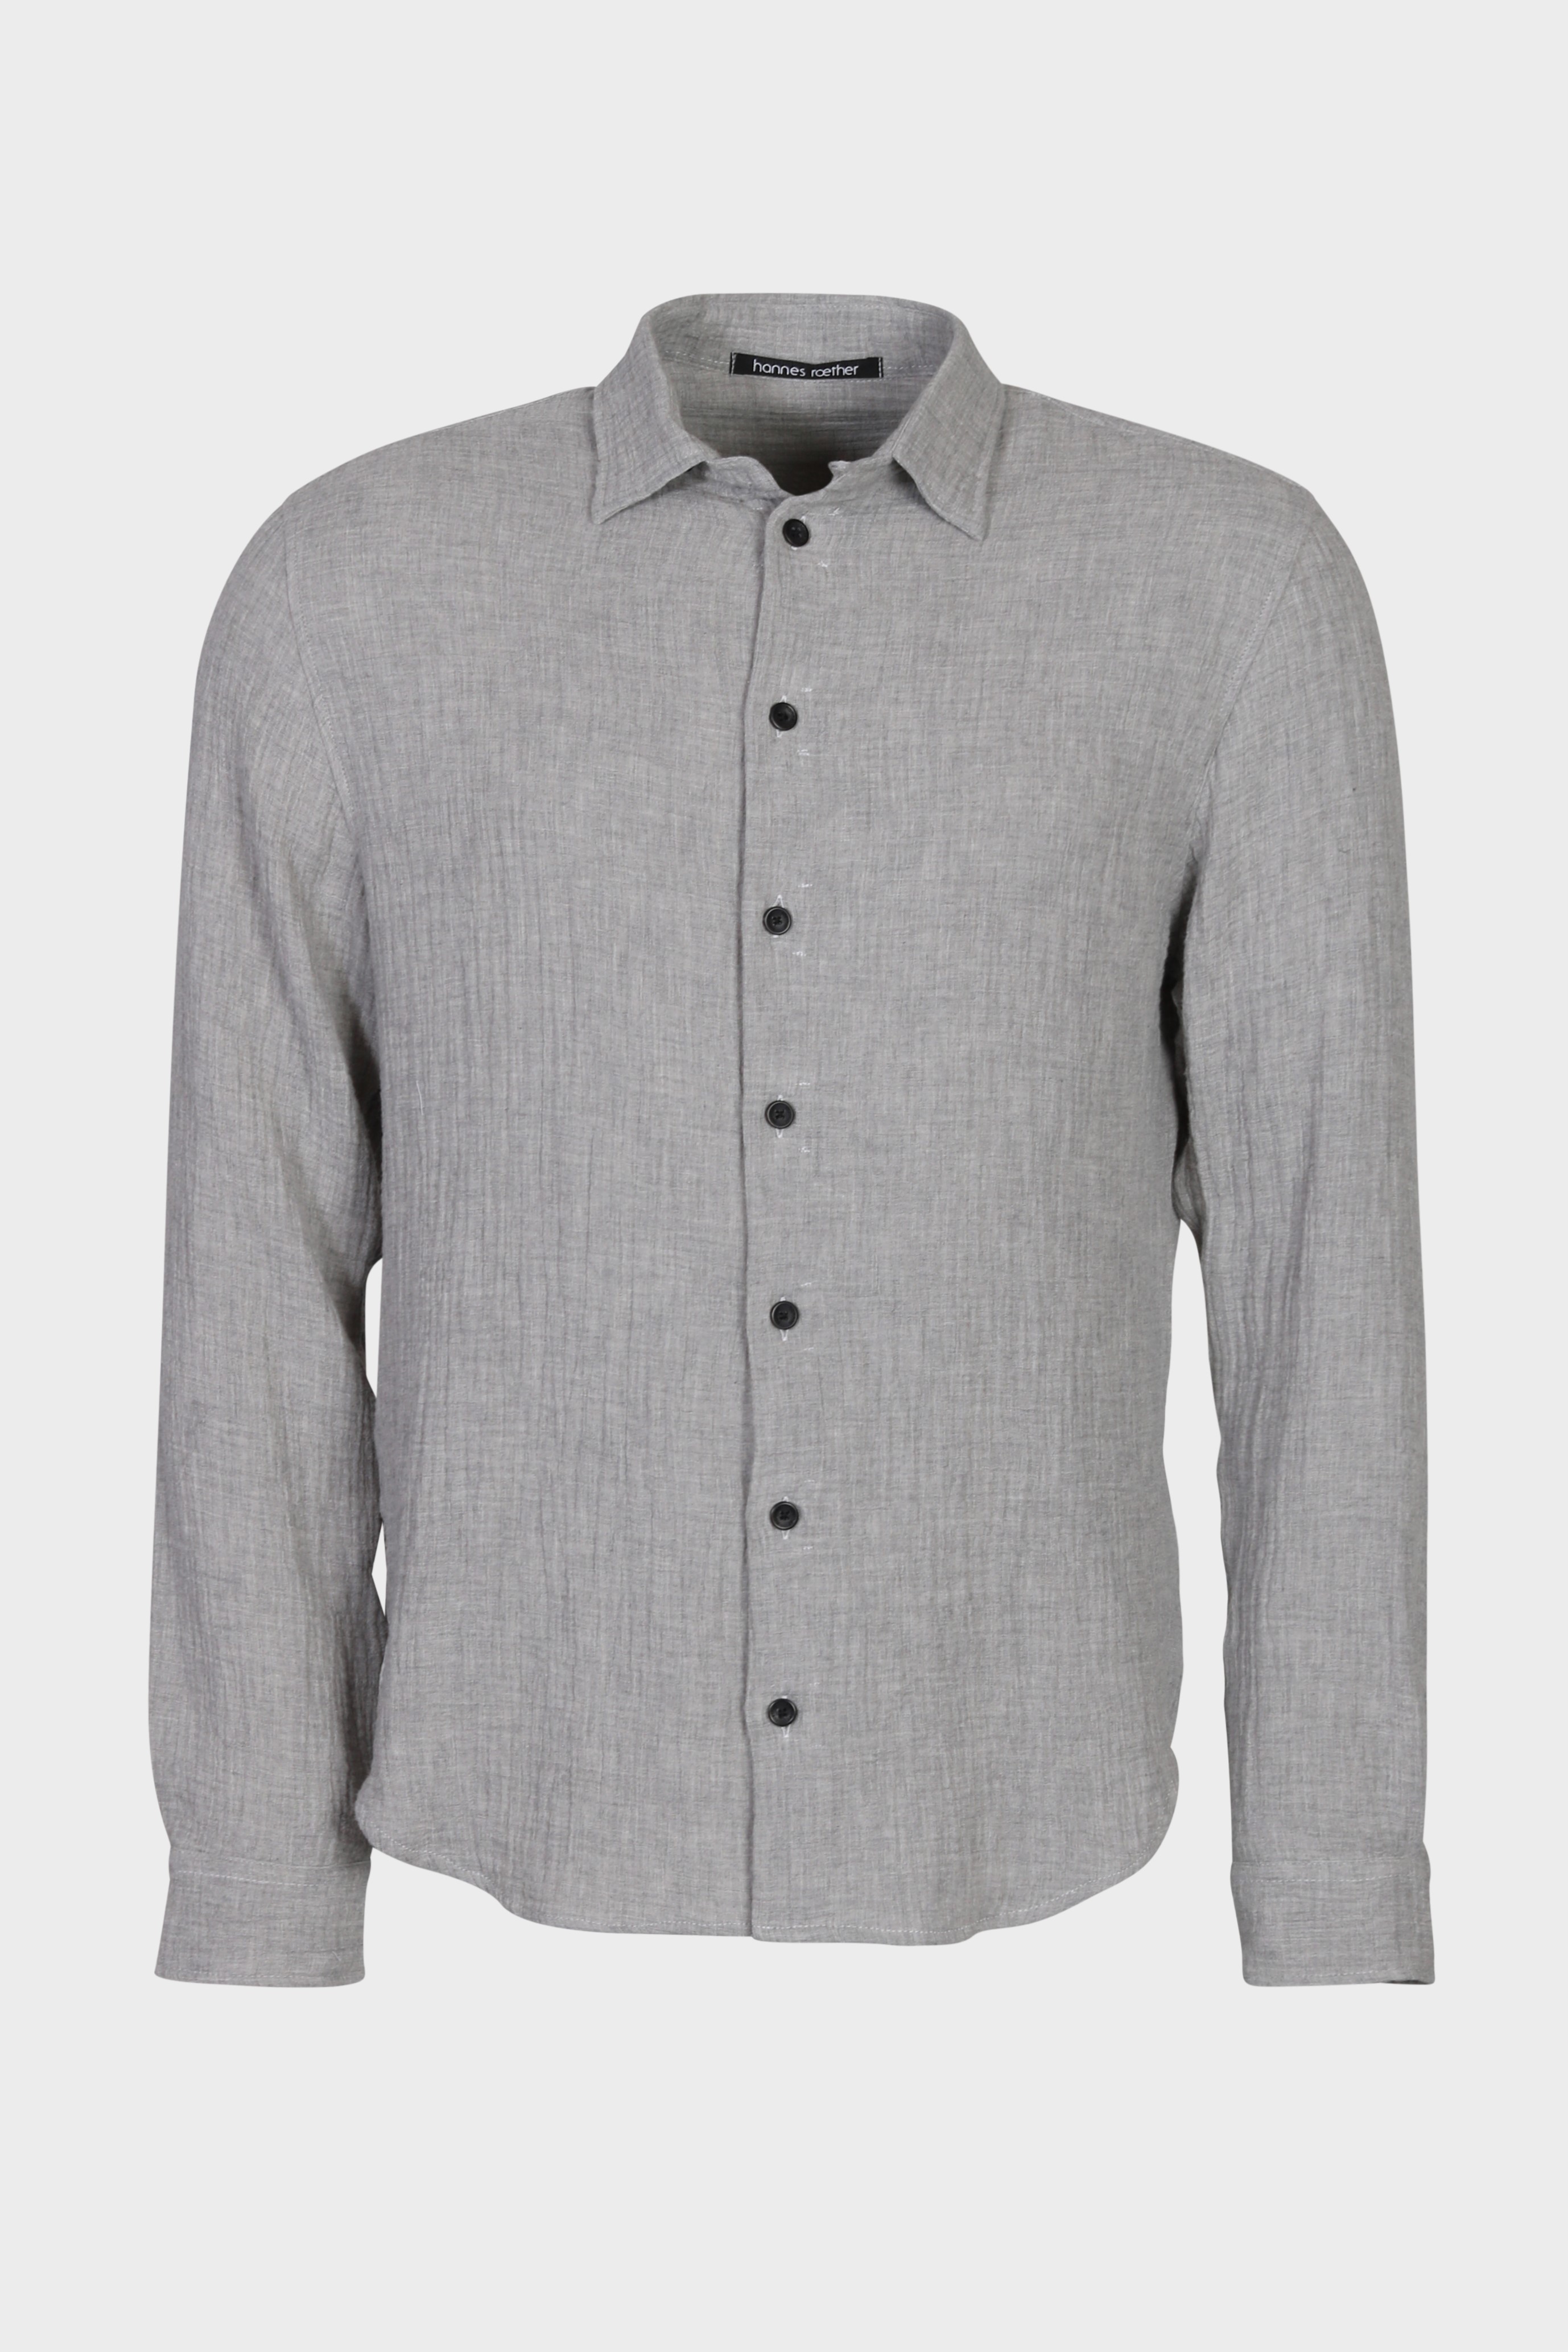 HANNES ROETHER Mousseline Shirt in Light Grey XL